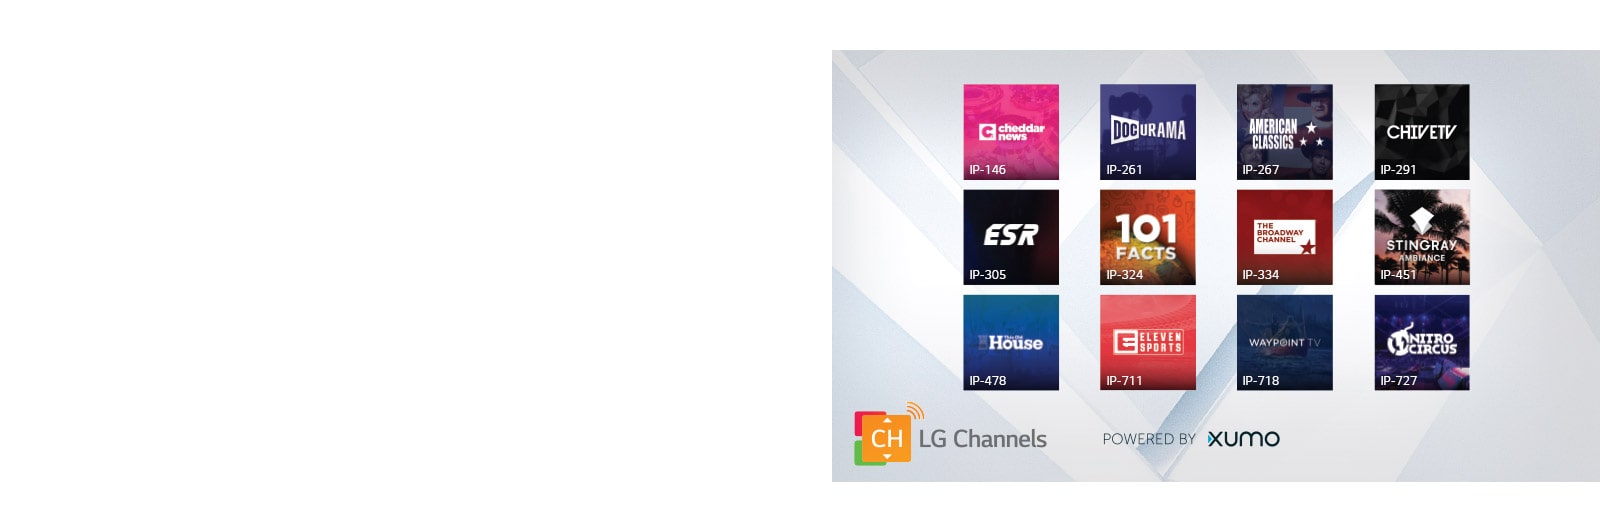 See more, stream more with LG Channels2